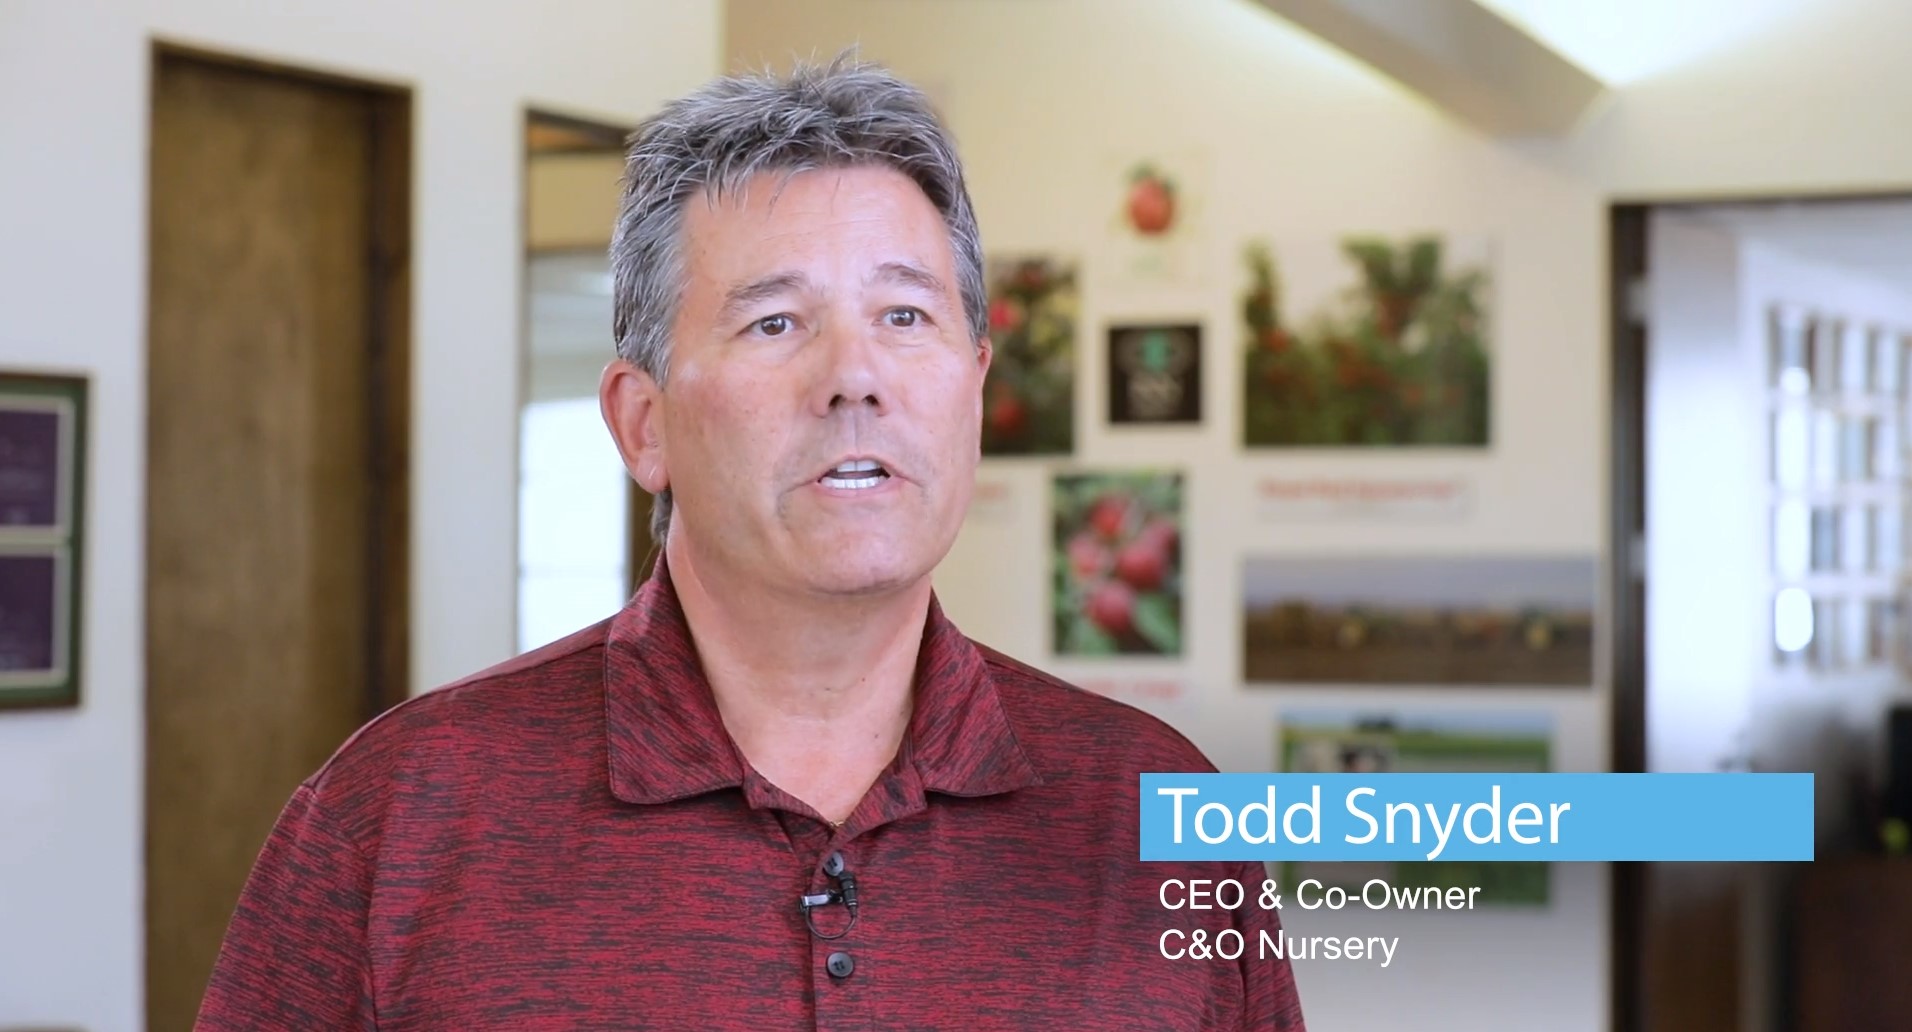 See why C&O Nursery made the switch from Micosoft Dynamics GP to Acumatica